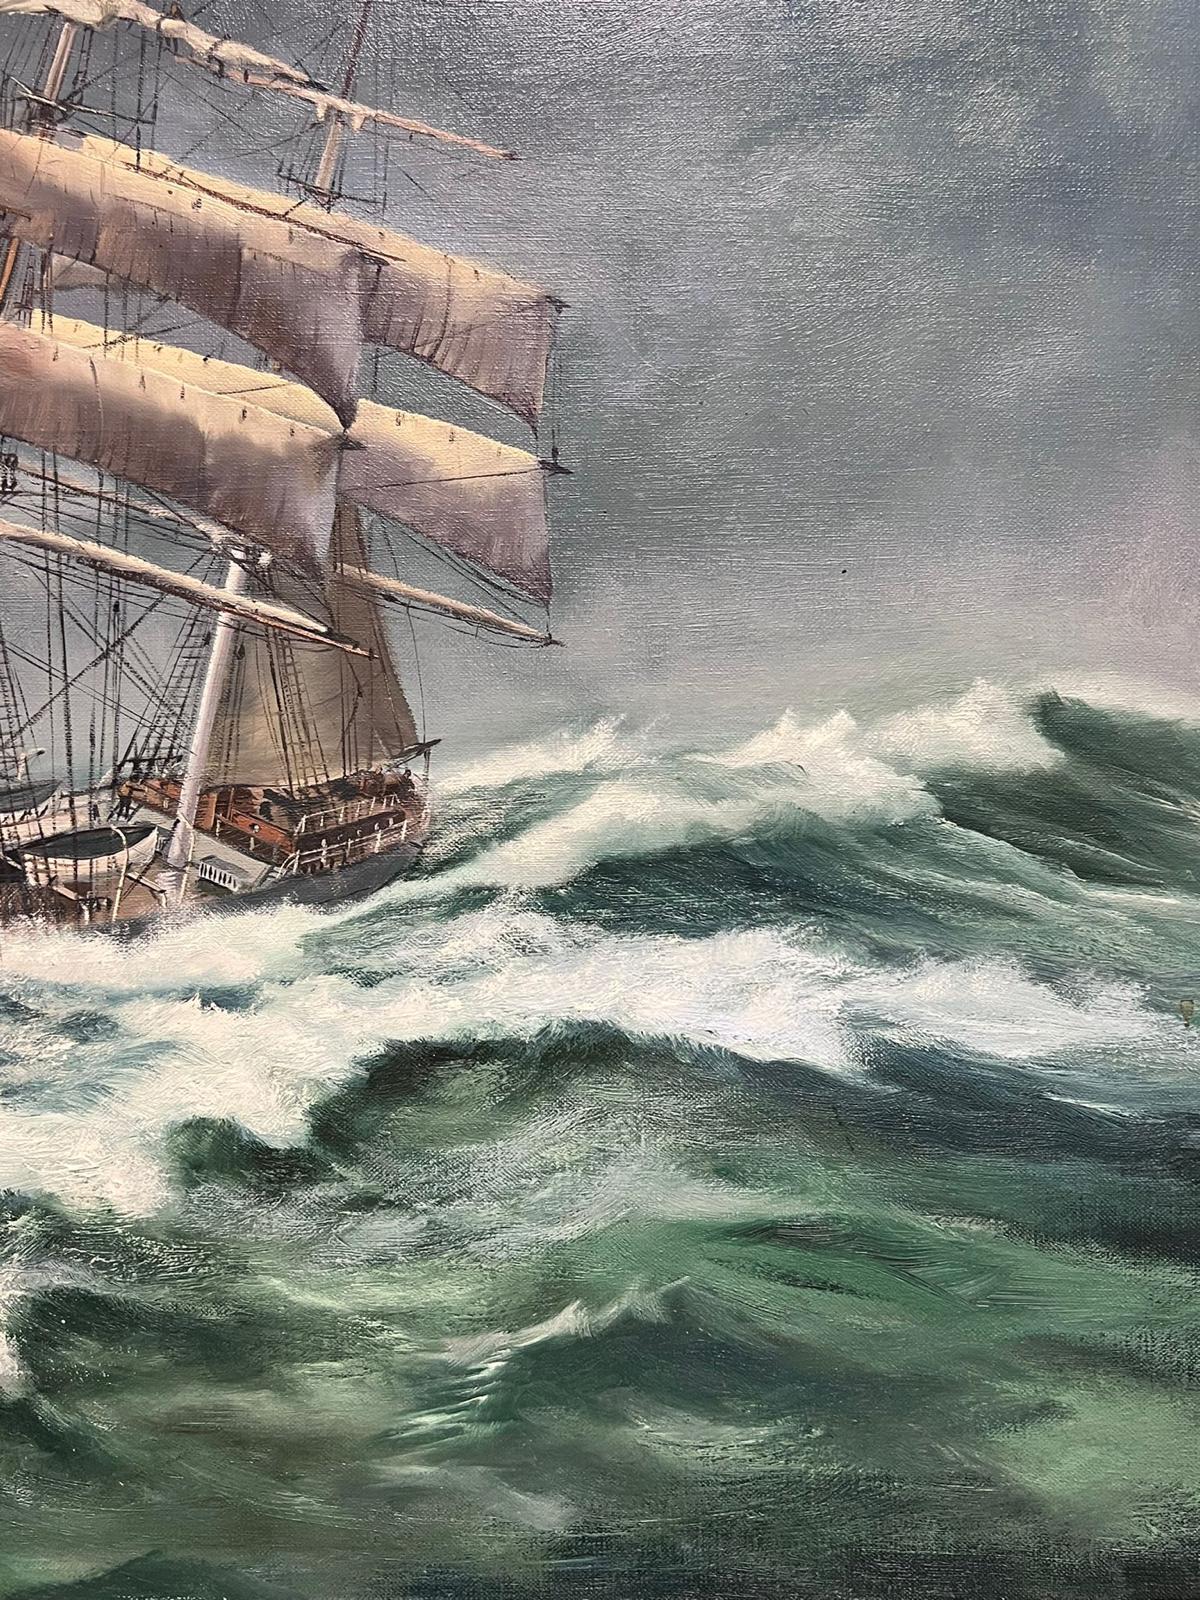 The Cutty Sark
by Robin Brooks (British marine artist, 1943)
signed oil on canvas, framed
frame: 29 x 41 inches
canvas: 24 x 36 inches
provenance: private collection, England
condition: very good and sound condition 